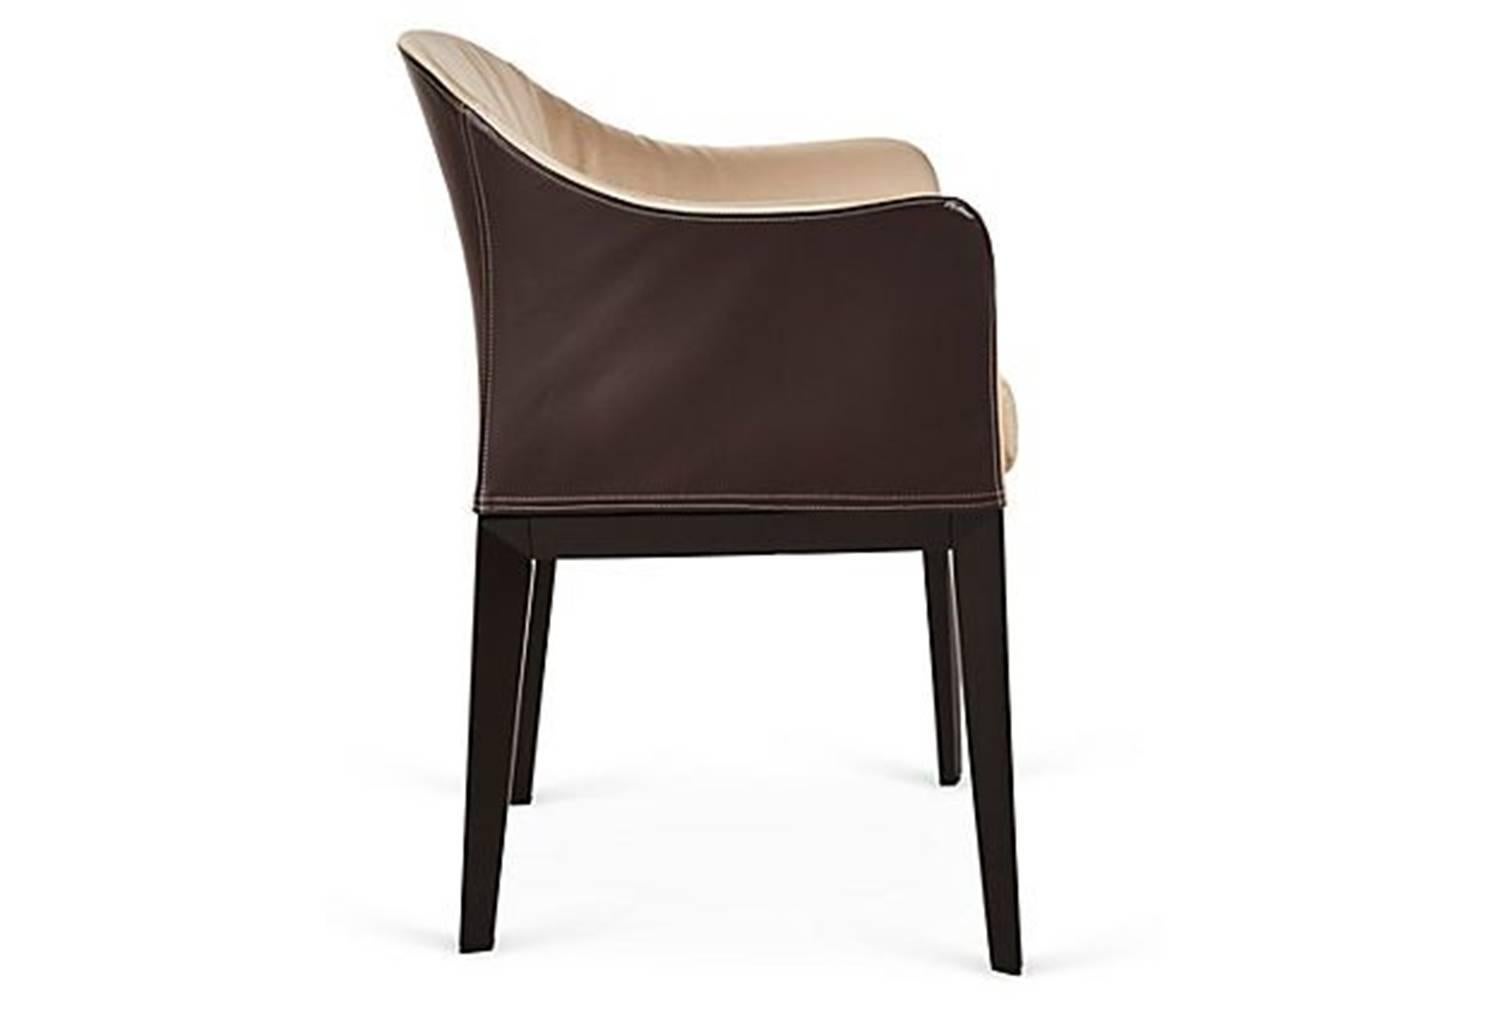 Giorgetti normal armchair in combination of leather and fabric.